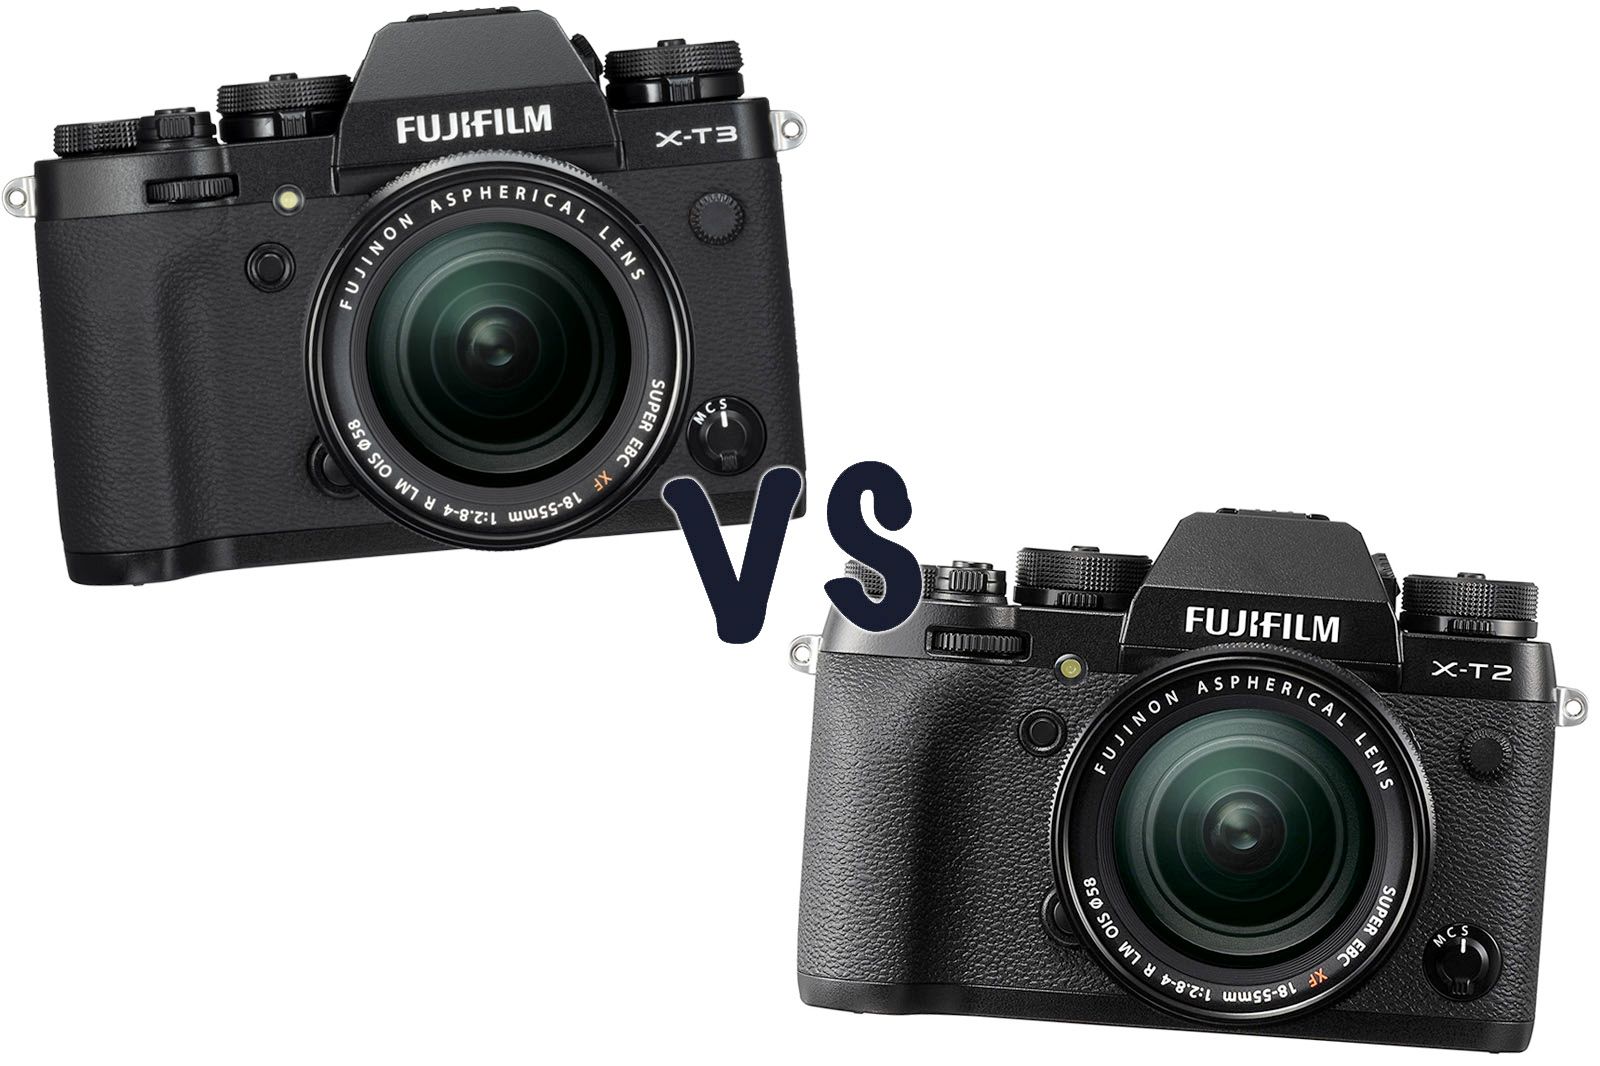 Fujifilm X-T3 vs X-T2 Whats the difference image 1